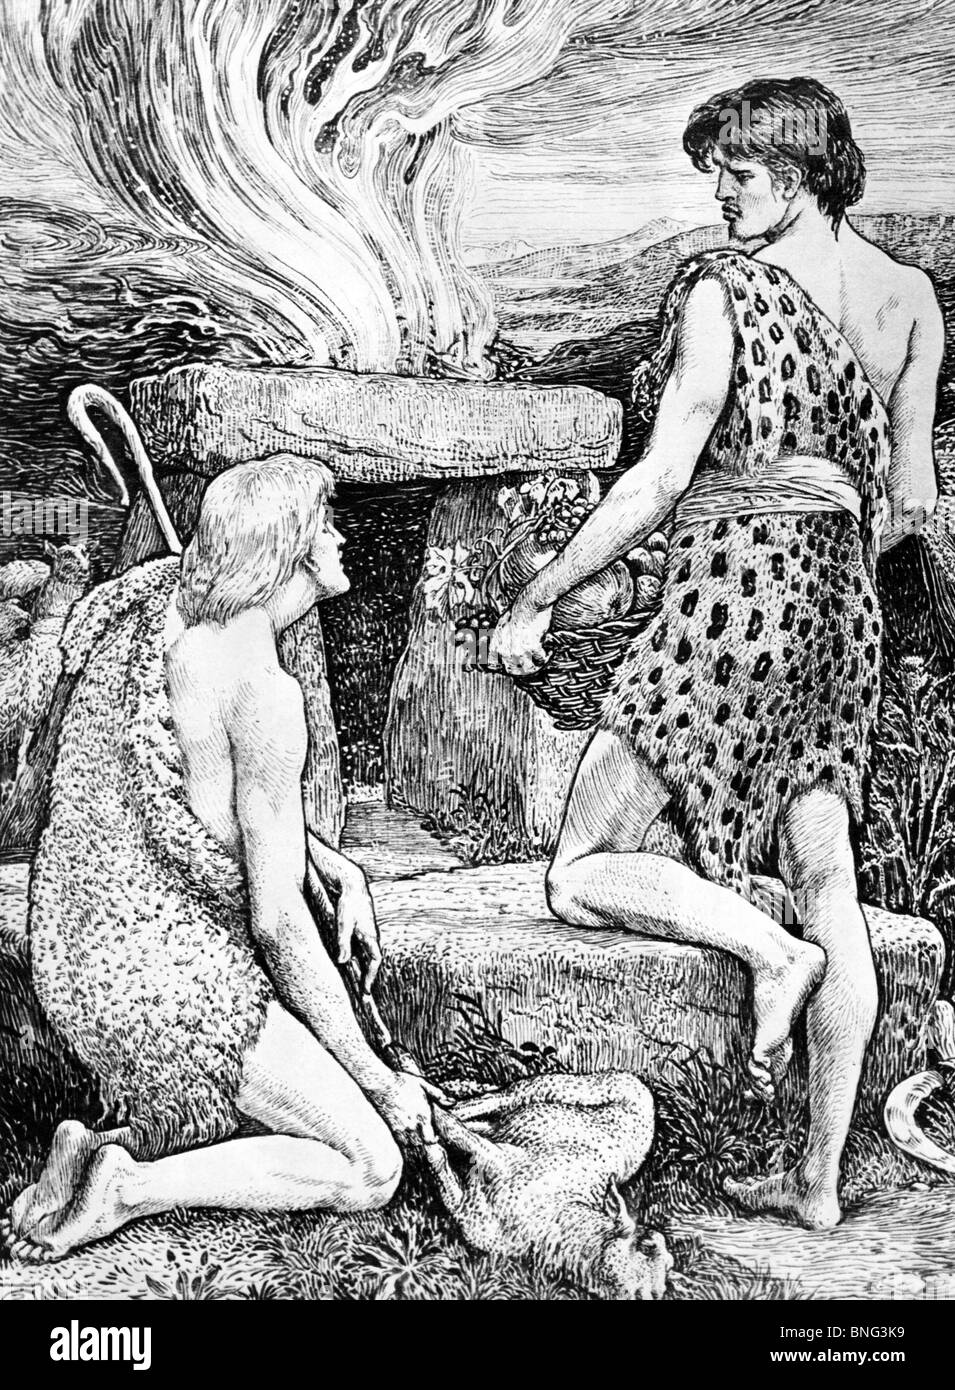 Cain and Abel by Walter Crane, 1845-1915 Stock Photo